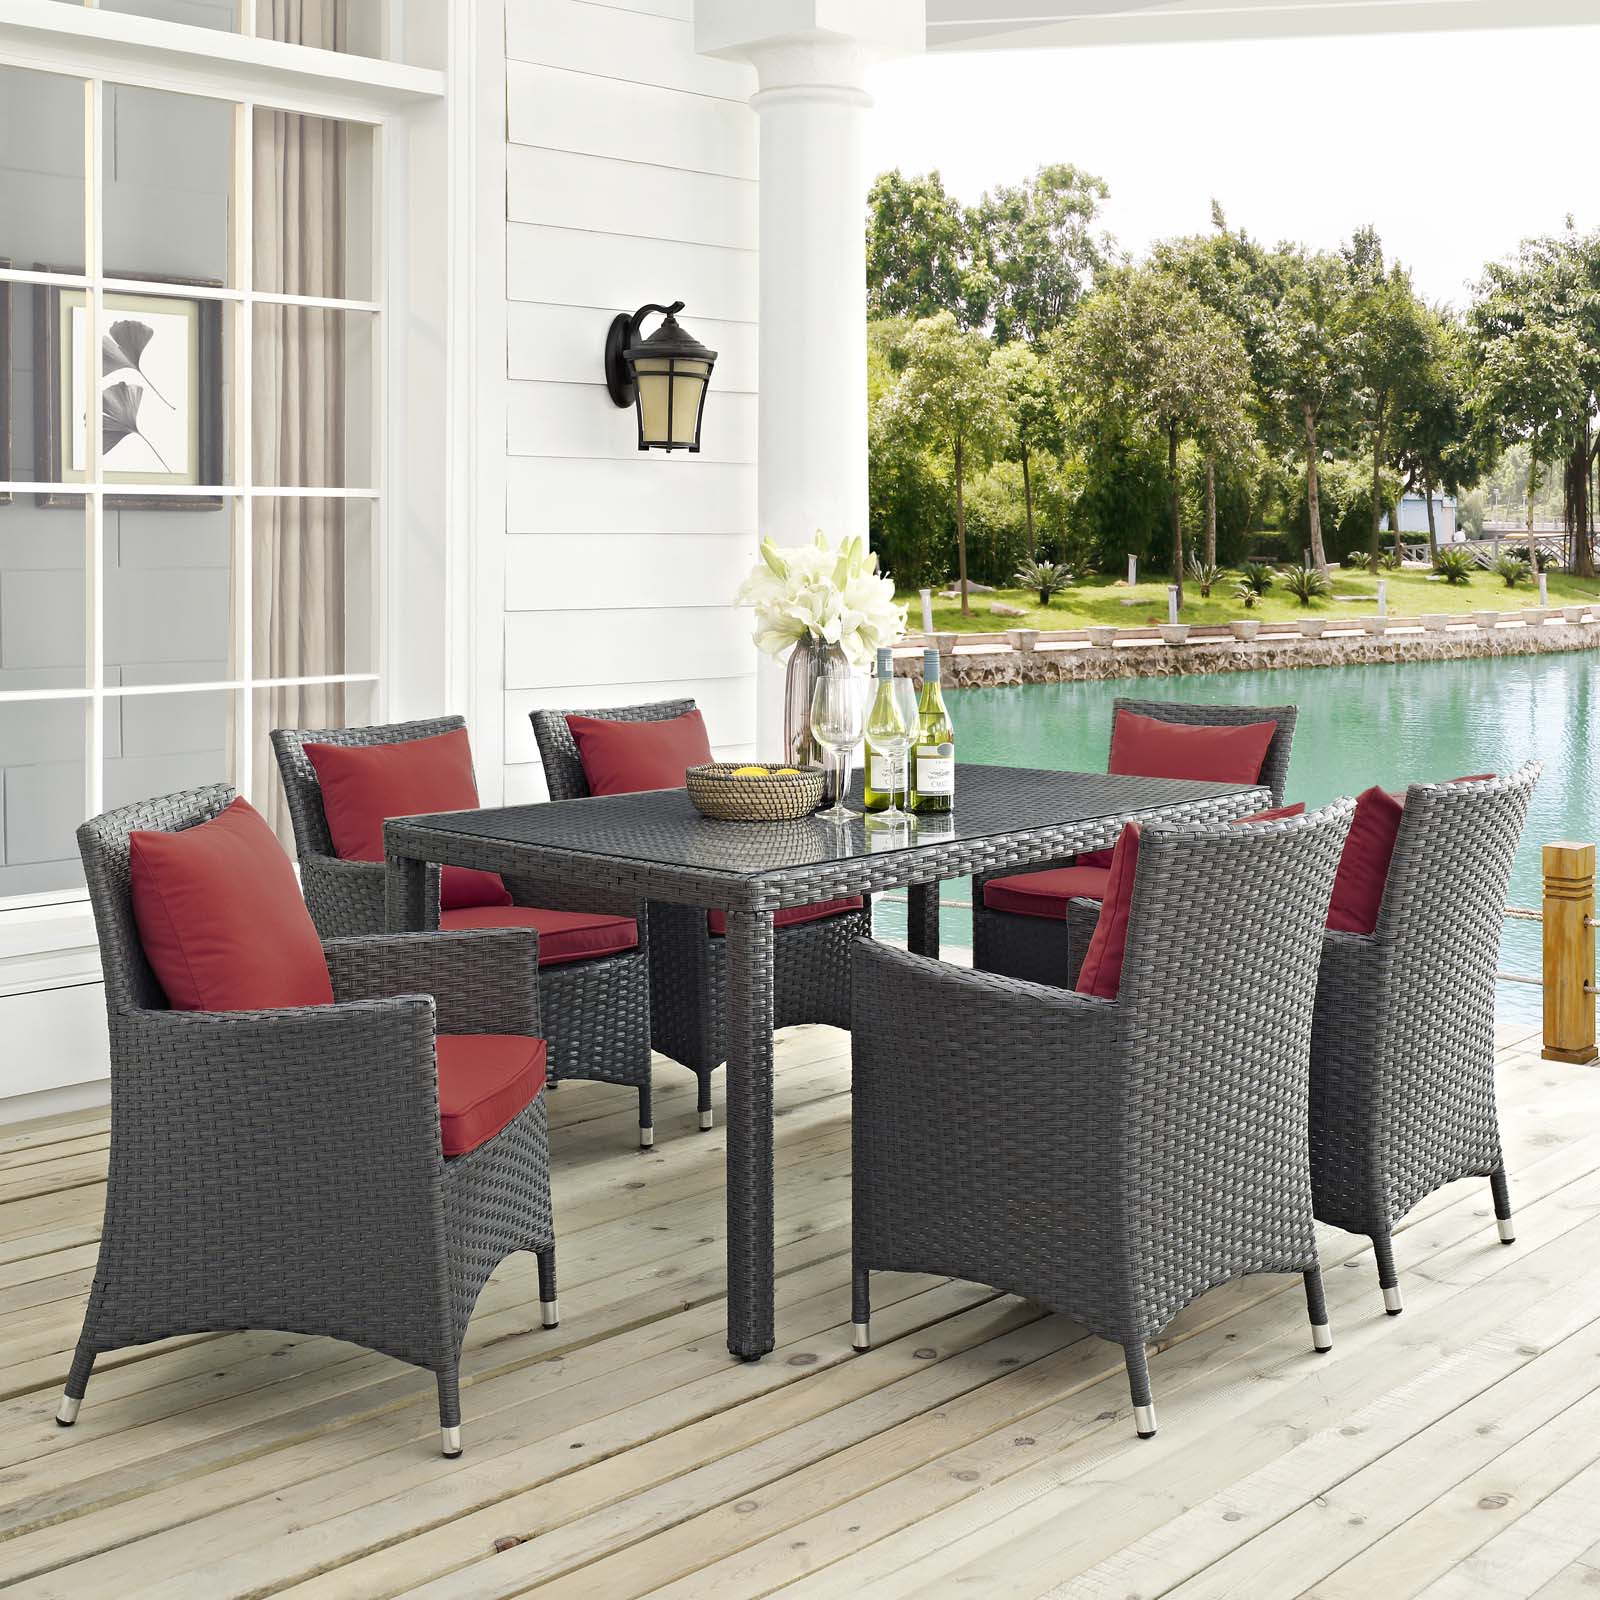 Modern Contemporary Urban Design Outdoor Patio Balcony Garden Furniture Side Dining Chair and Table Set, Sunbrella Rattan Wicker, Red - image 2 of 6